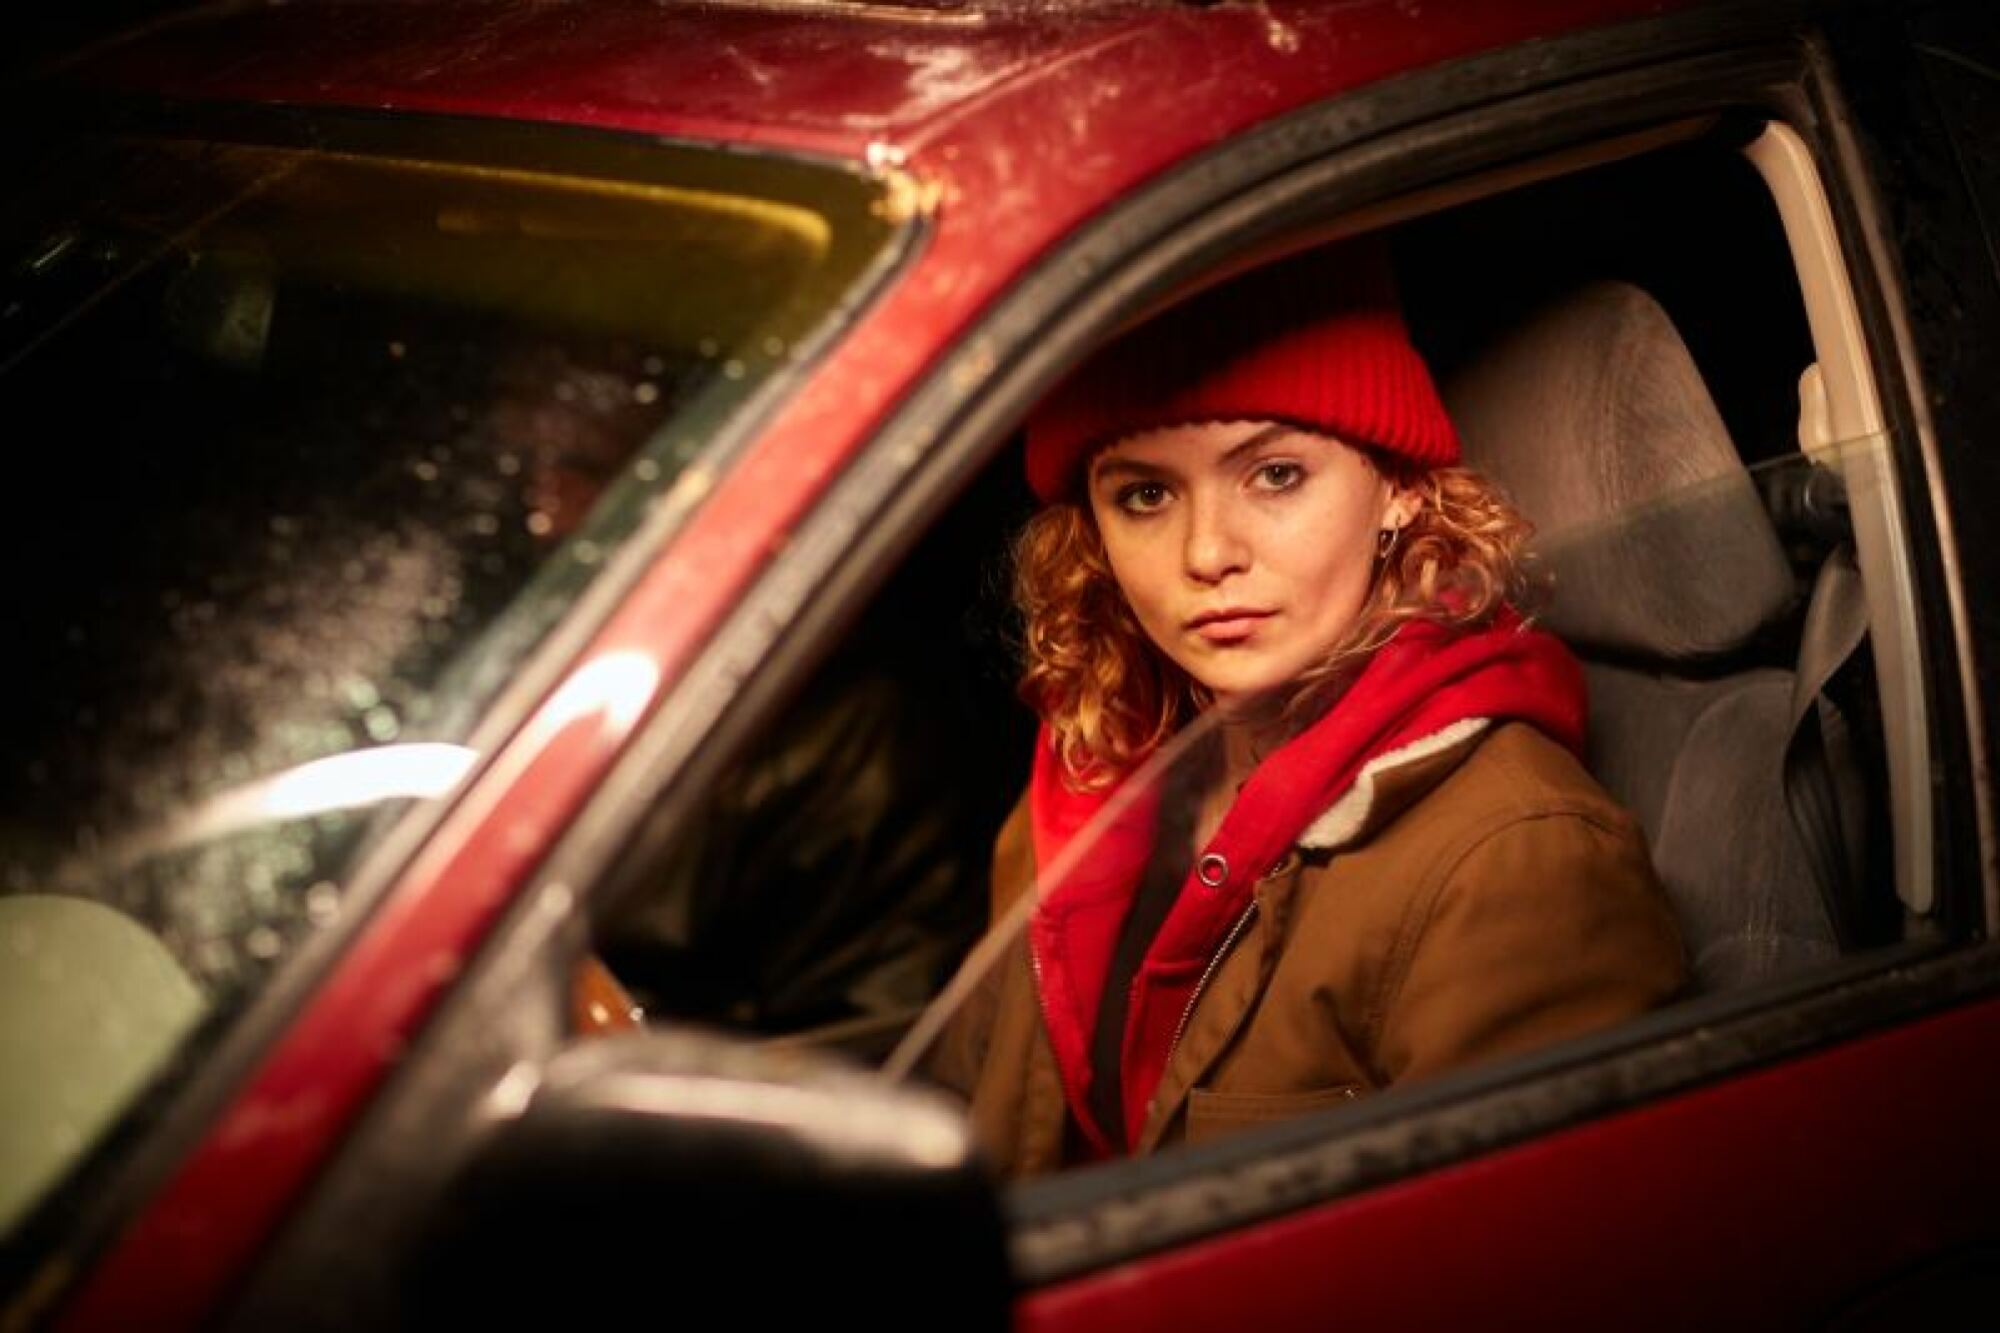 A woman in a red hat sits in a red car.